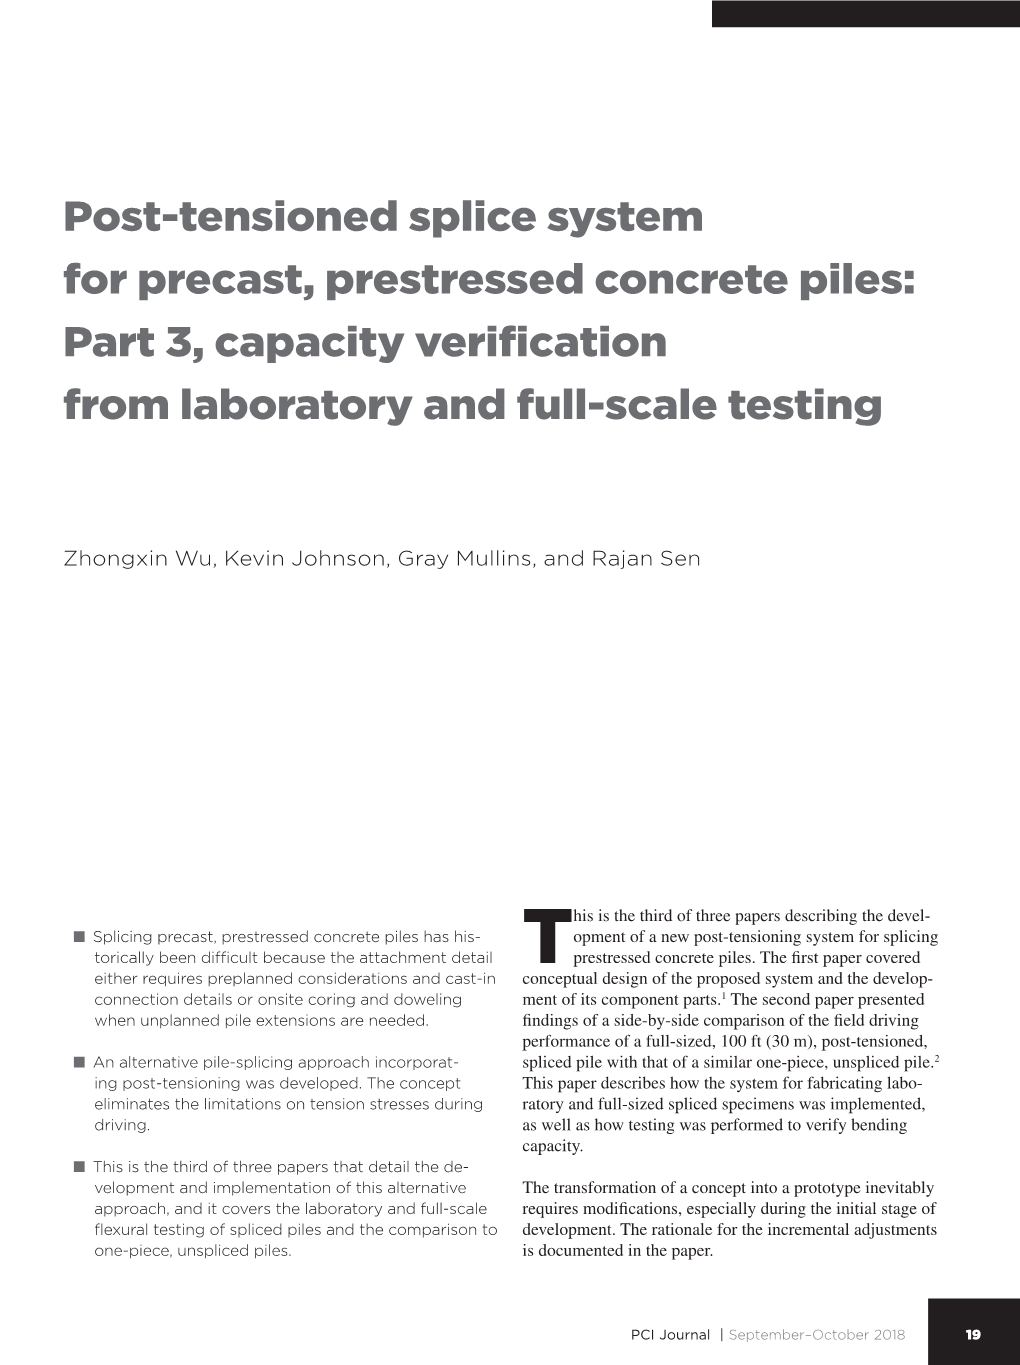 Post-Tensioned Splice System for Precast, Prestressed Concrete Piles: Part 3, Capacity Verification from Laboratory and Full-Scale Testing